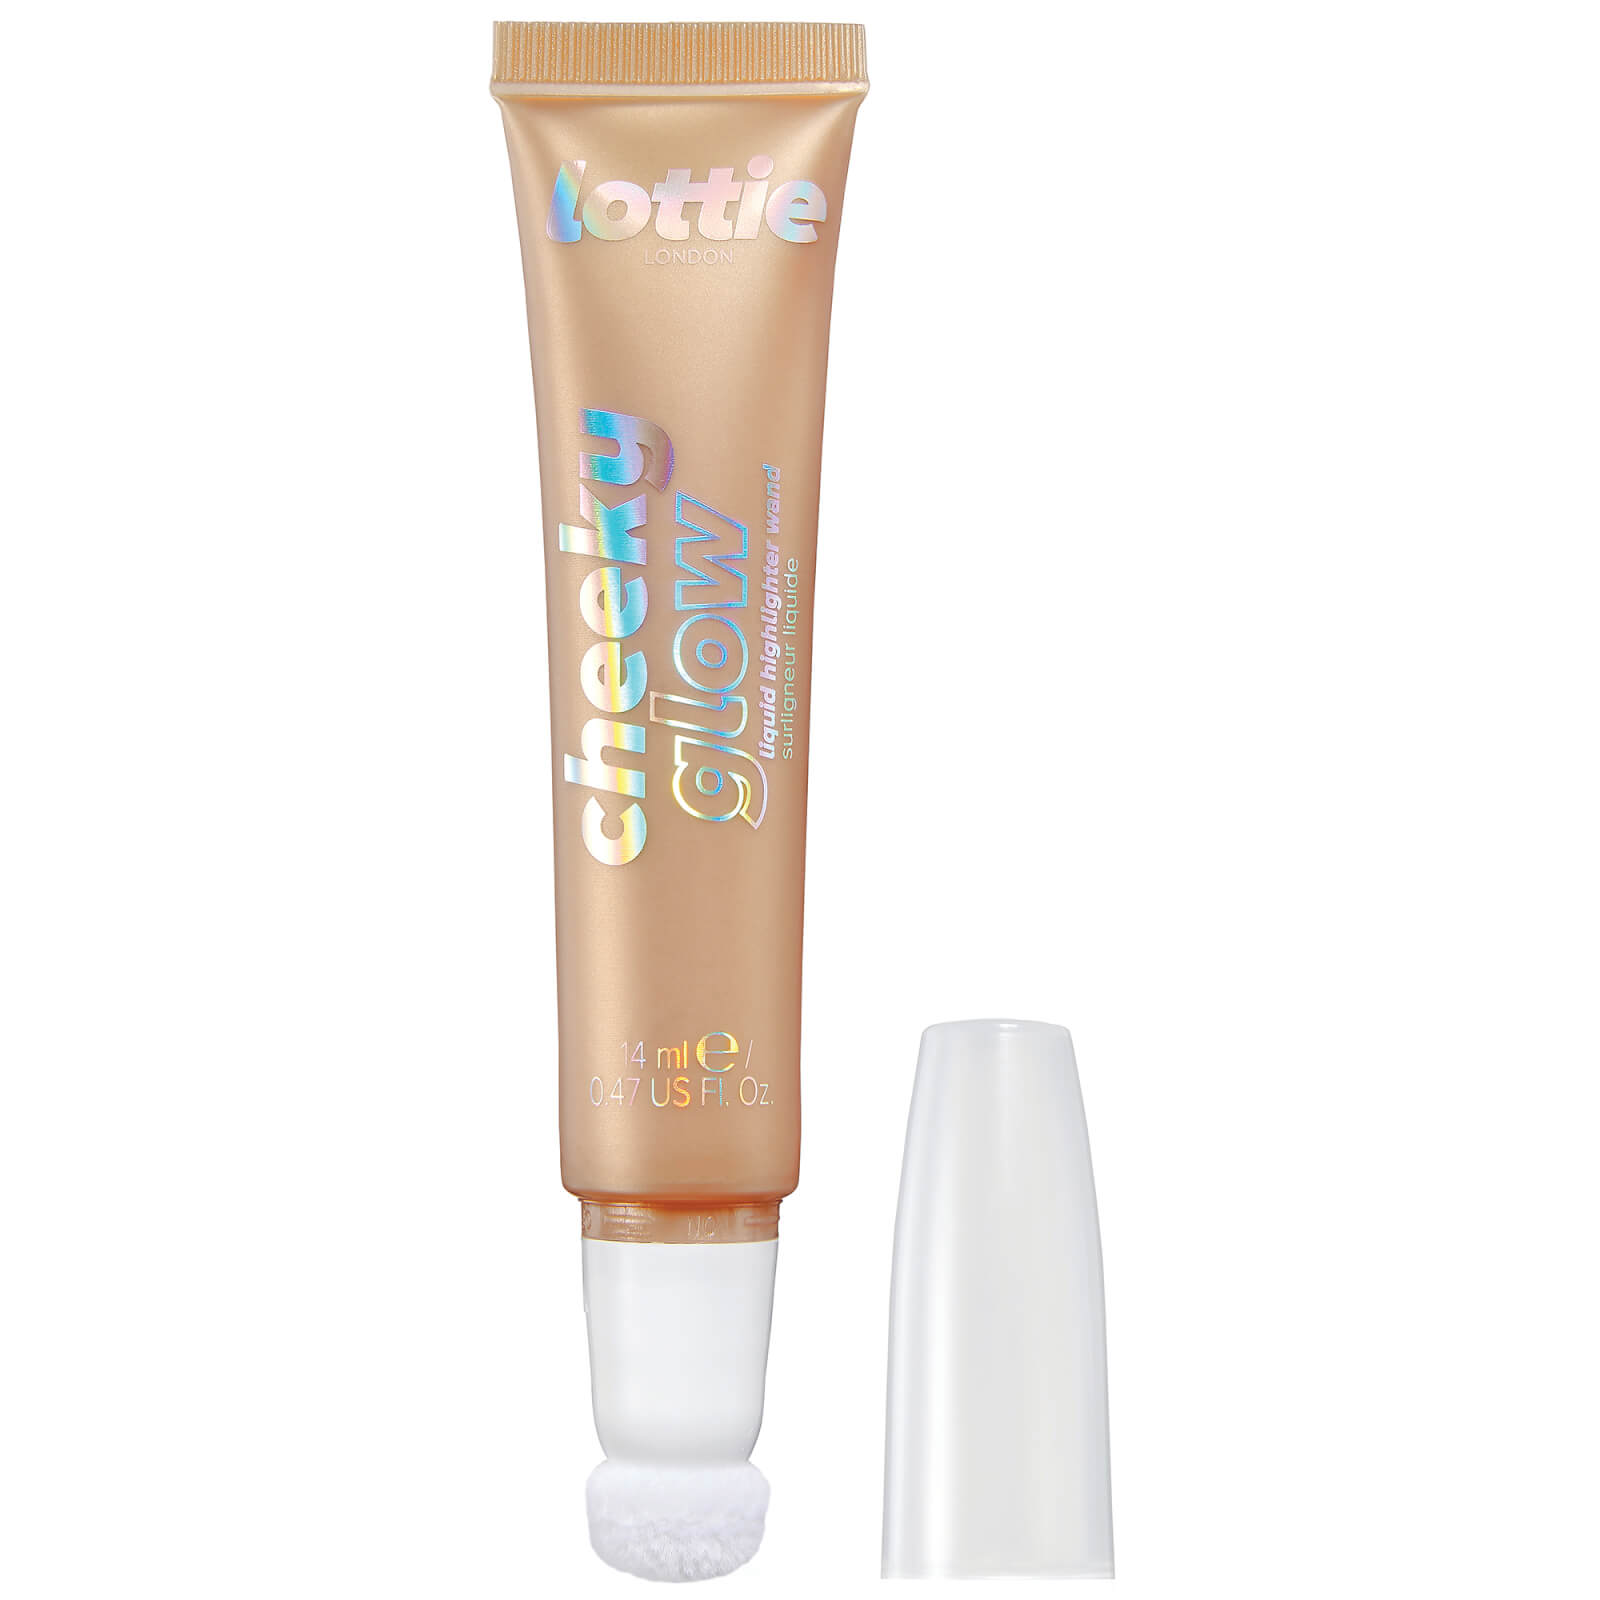 Lottie London Cheeky Glow Highlighter 25g (various Shades) - Champagne Drip